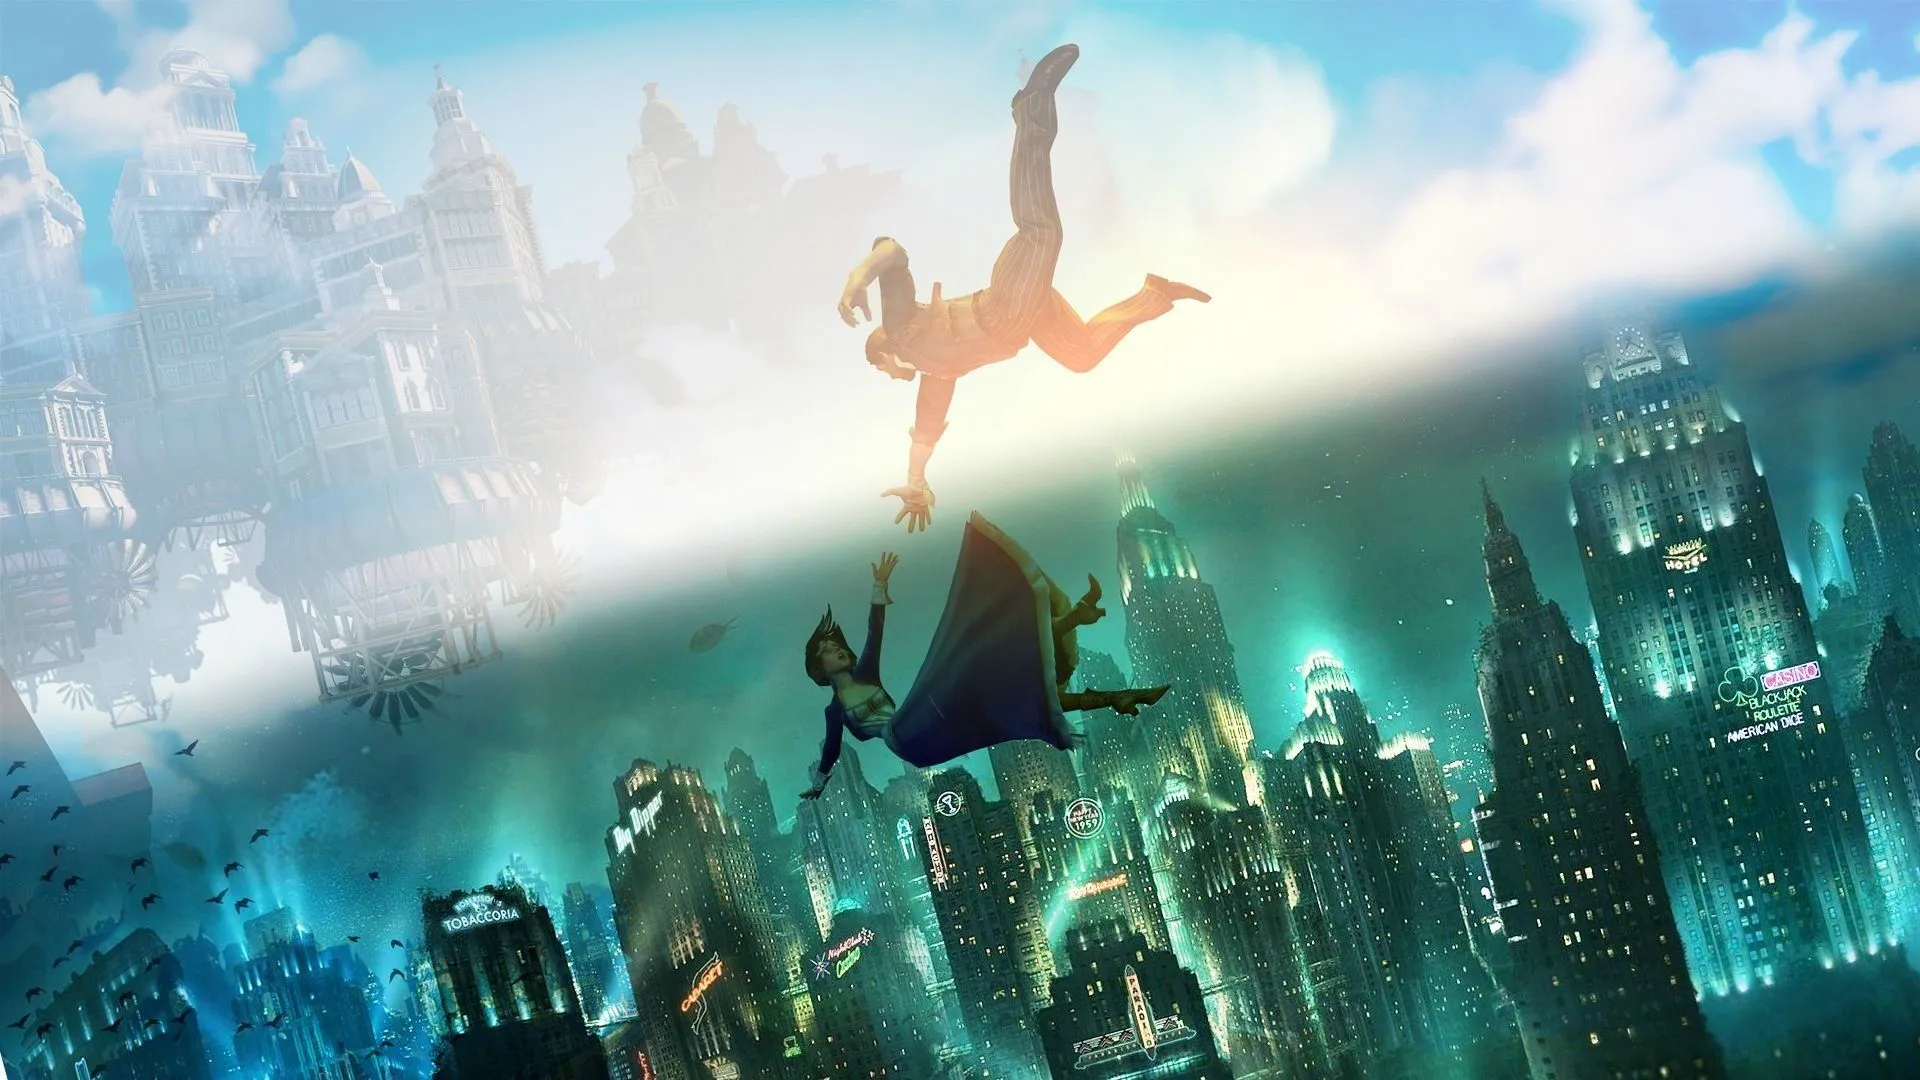 Bioshock: the film is coming and it's almost time for release